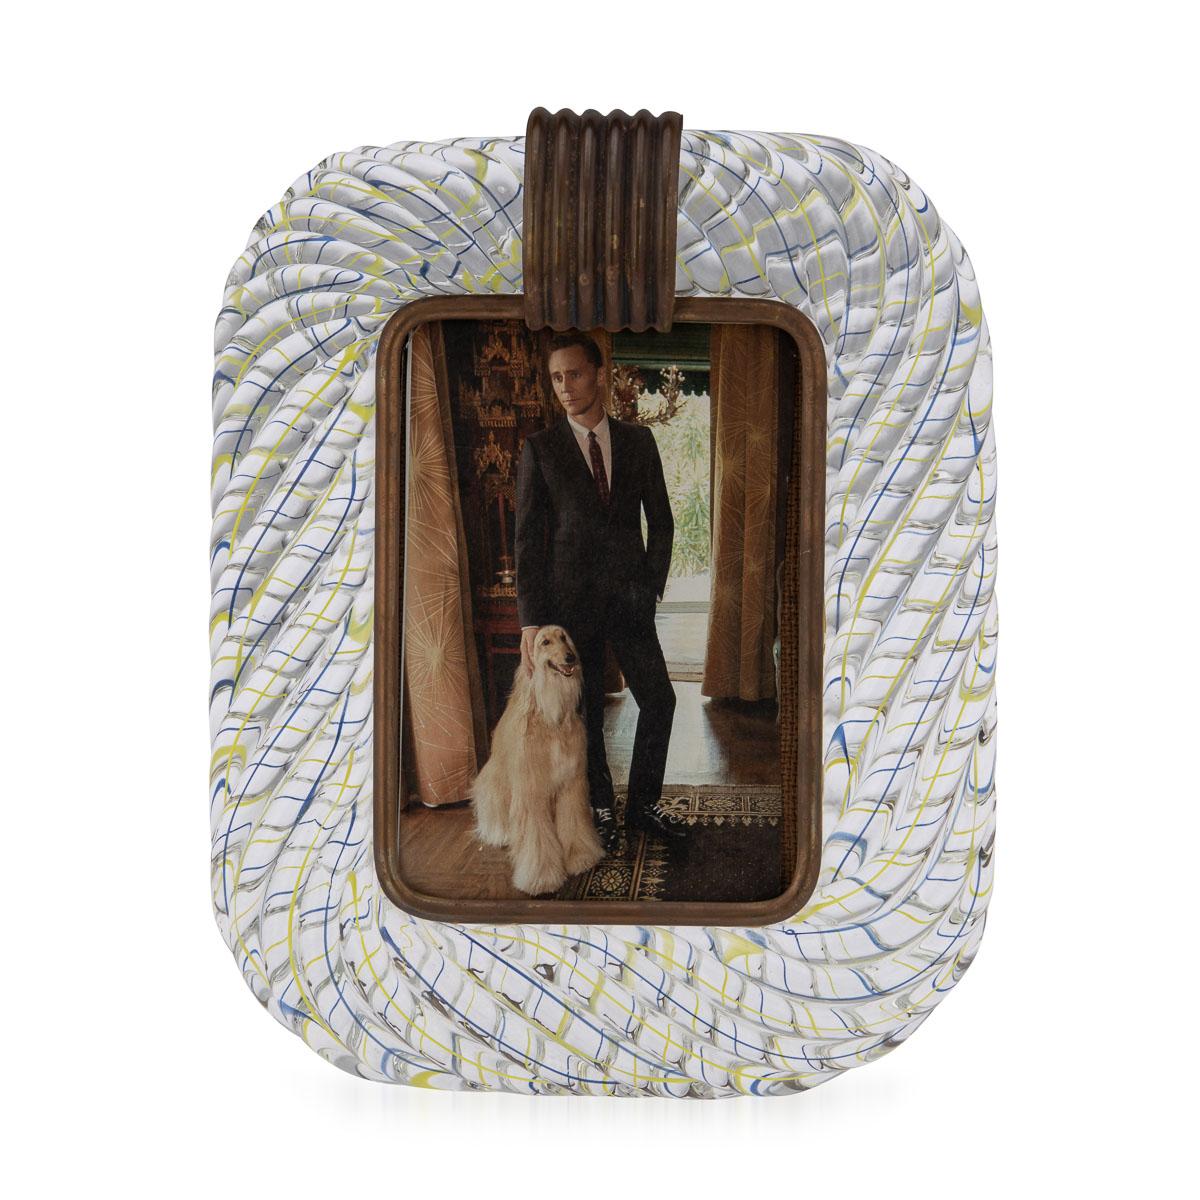 A stunning glass mounted photograph frame made by the world renowned Venini in Venice, Italy. The twisted glass rope picture frame was manufactured around the middle of the 20th century and encapsulates Venini’s philosophy of elegance and art using